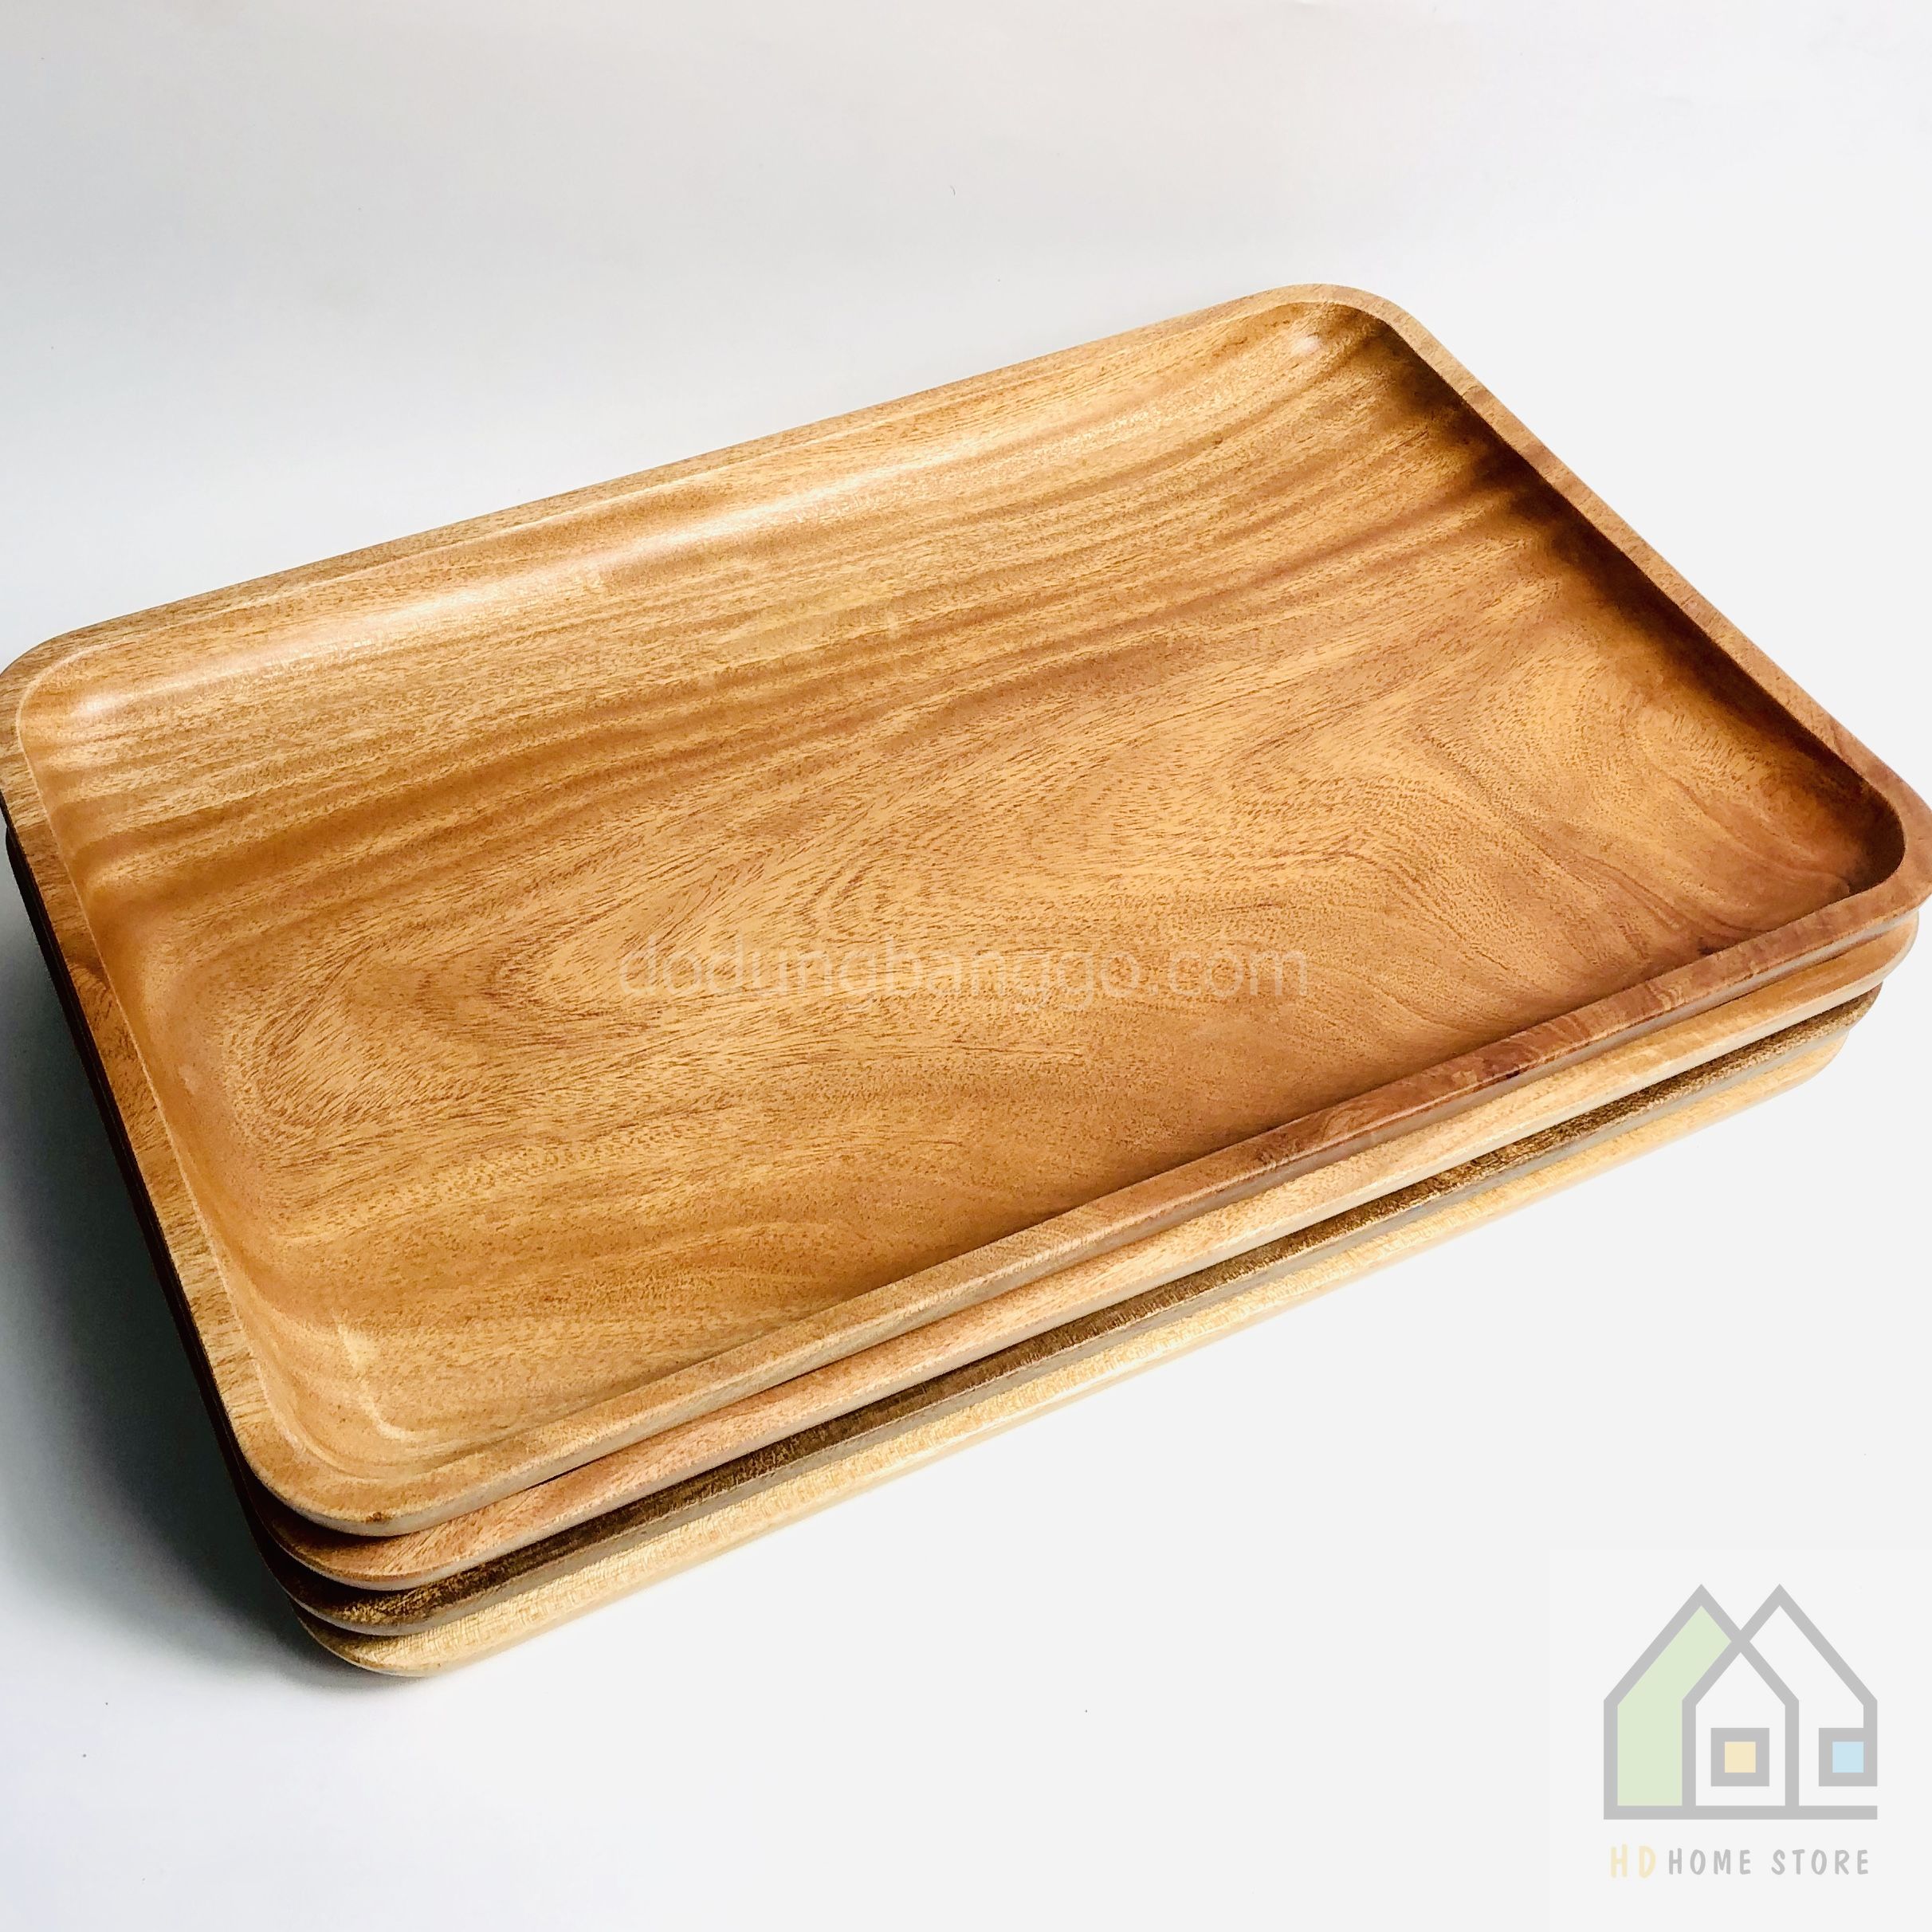 Natural wooden serving tray 26x40CM 2020 02 21 14 07 IMG 4837 result